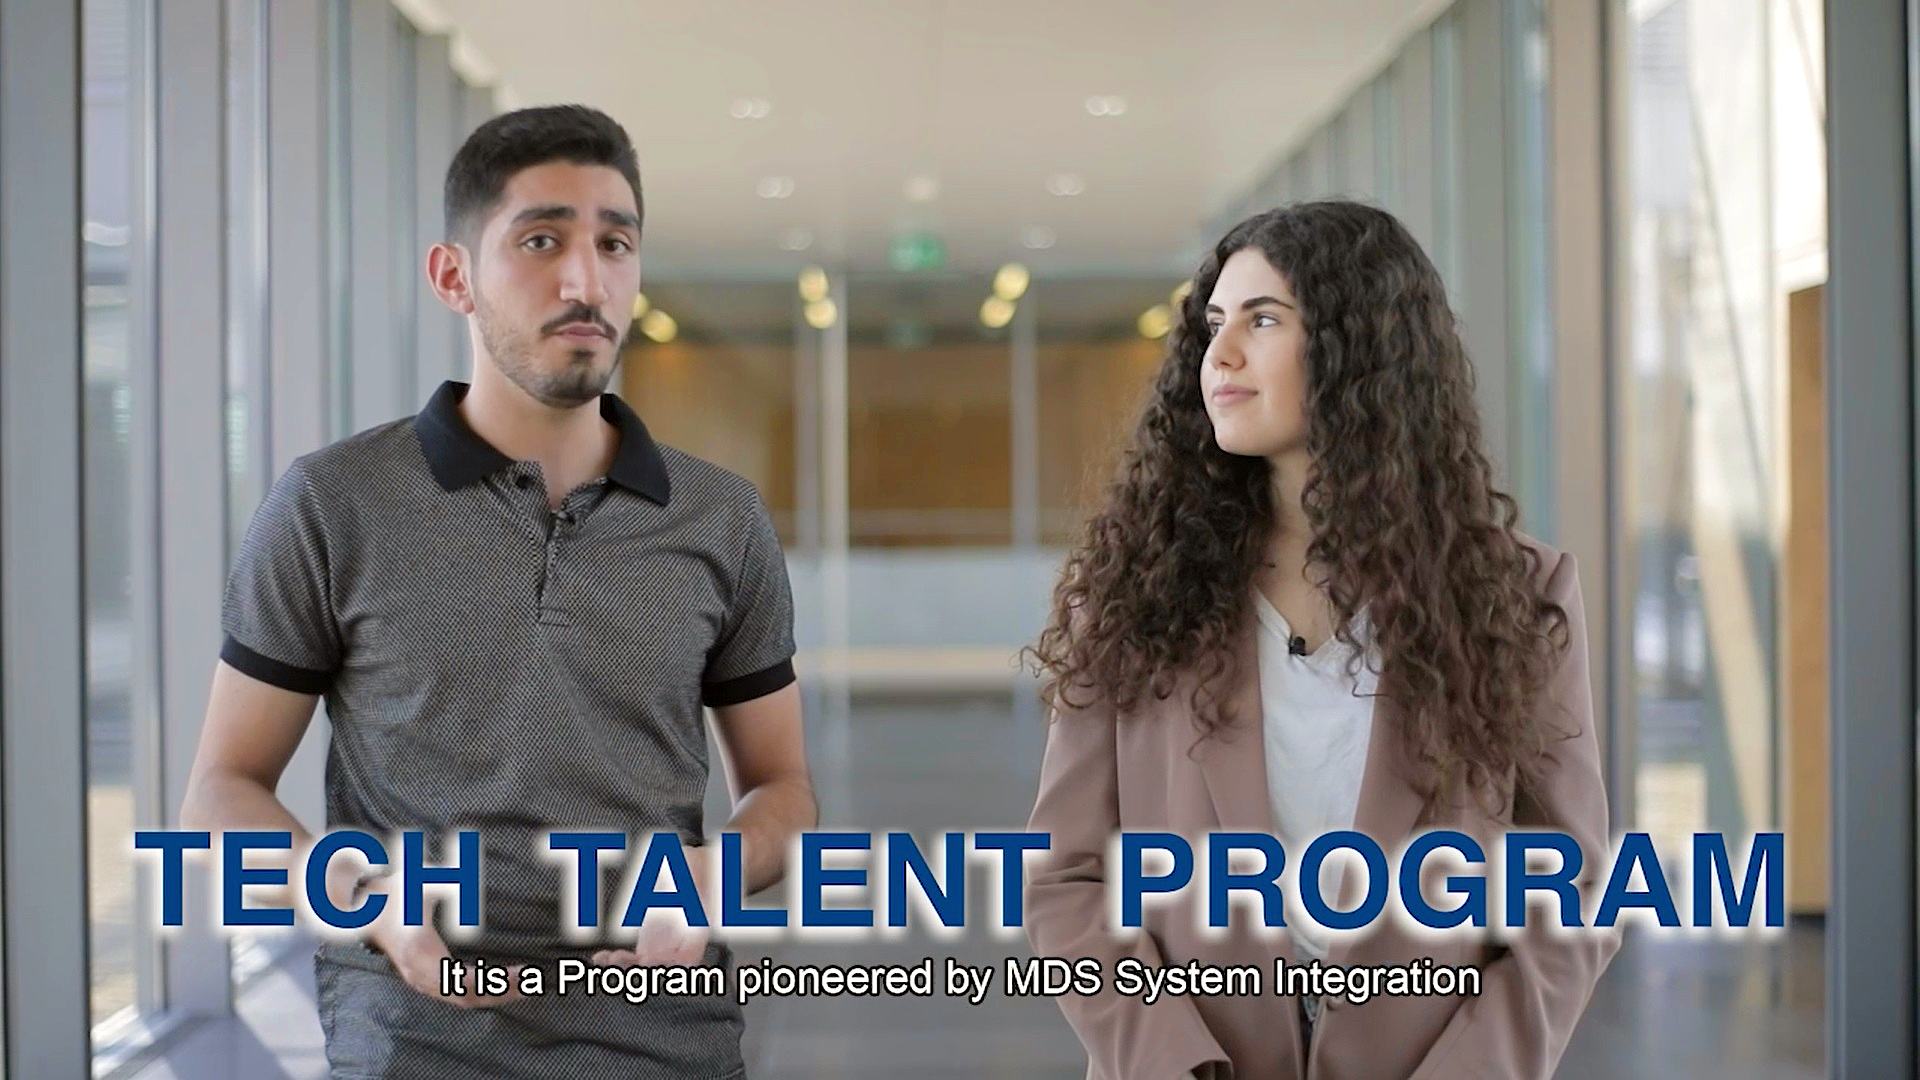 two young people are seen on a video still with the words Tech Talent Program acorss the lower part of the screen